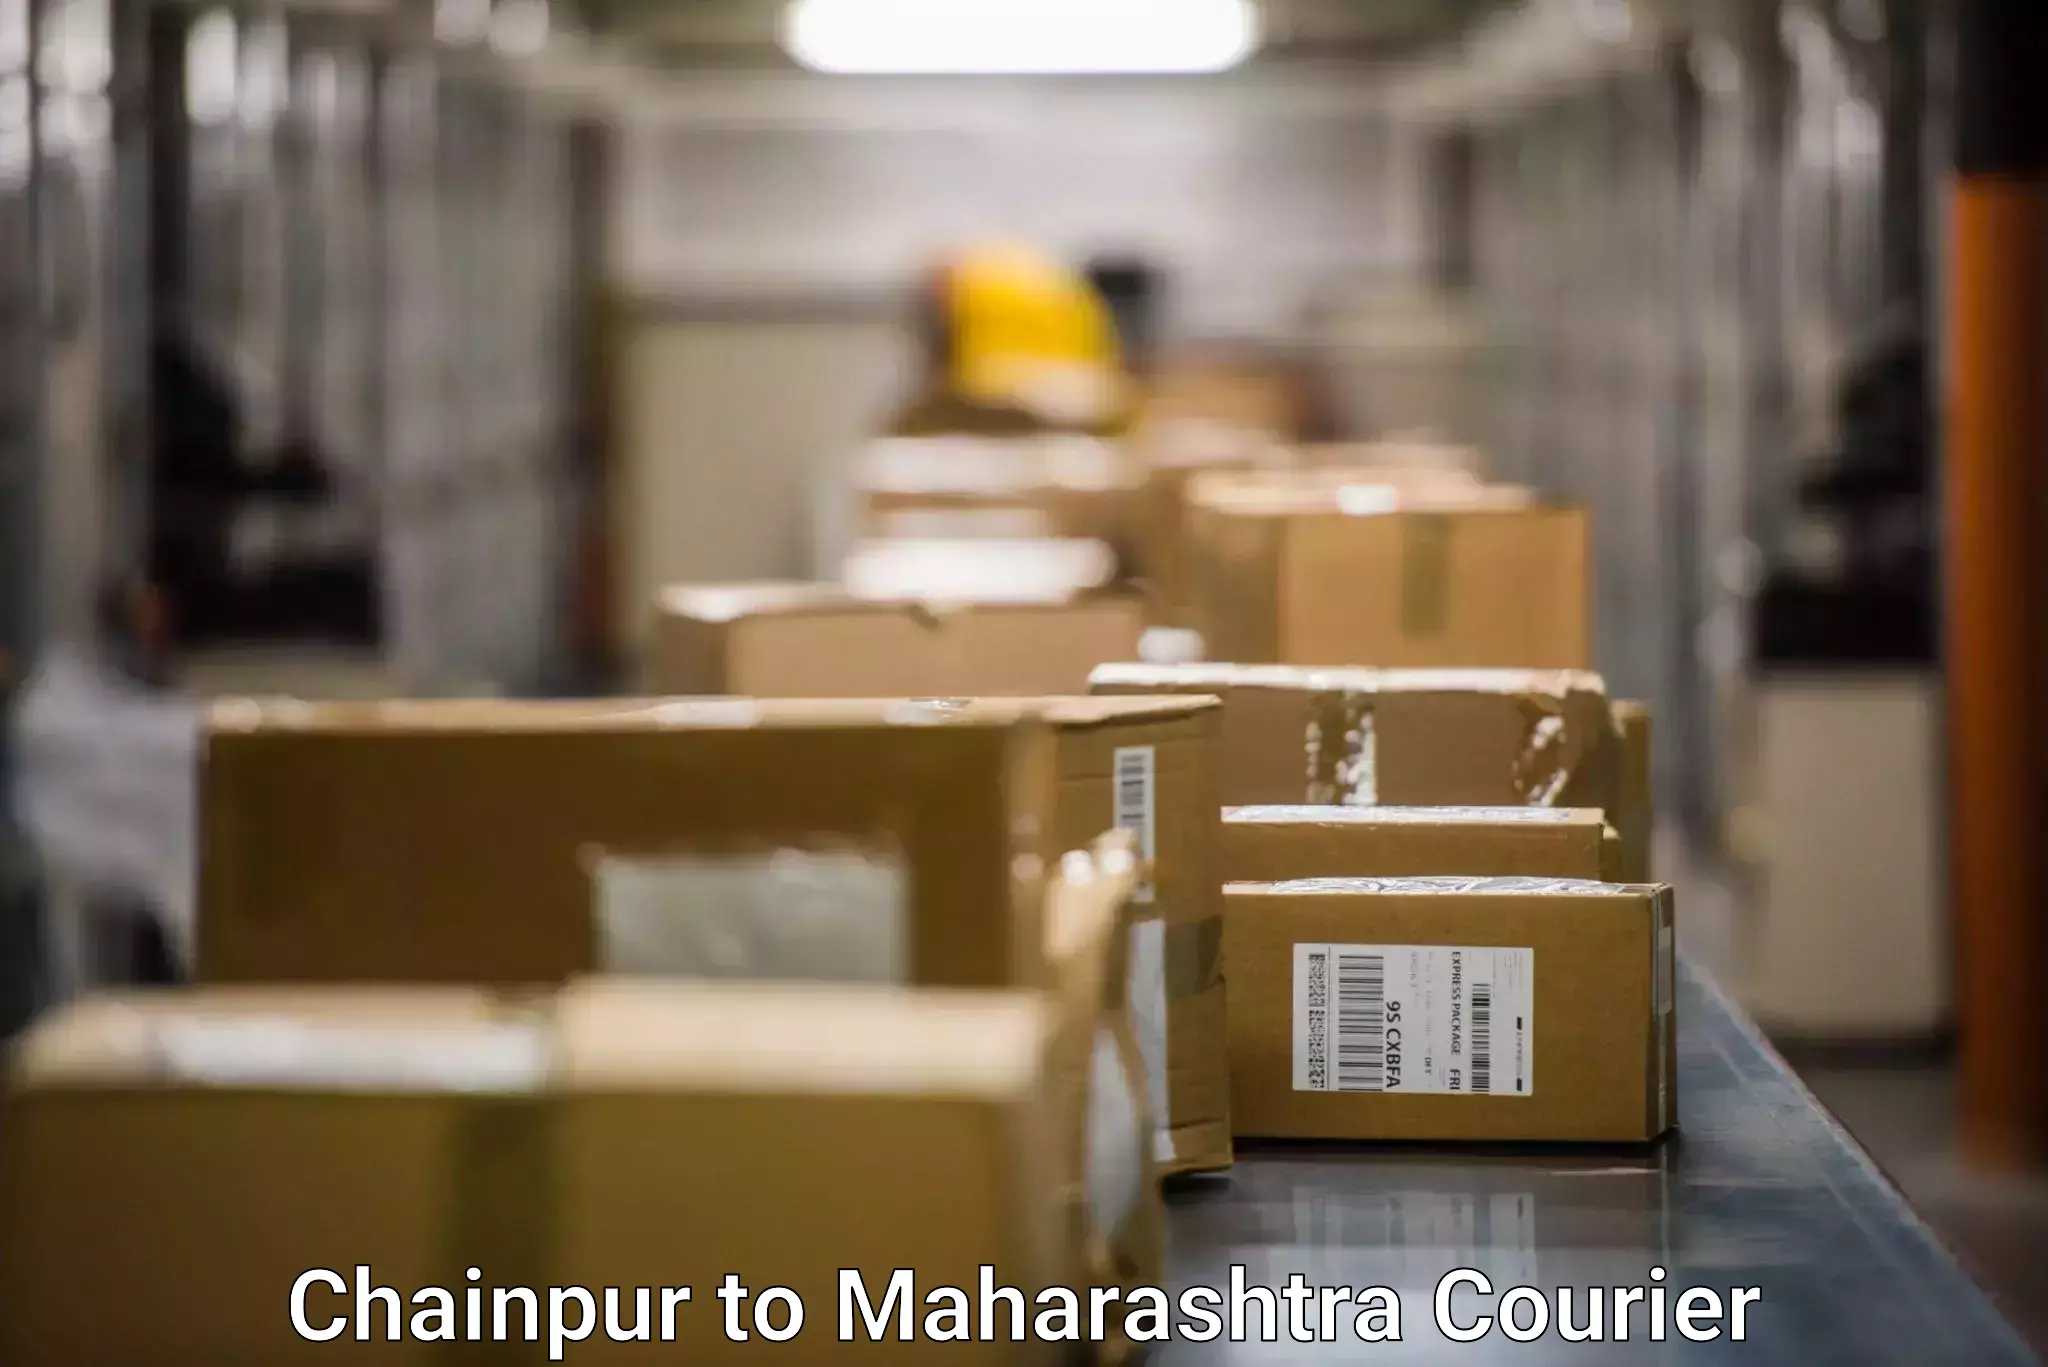 Affordable parcel service Chainpur to Maharashtra